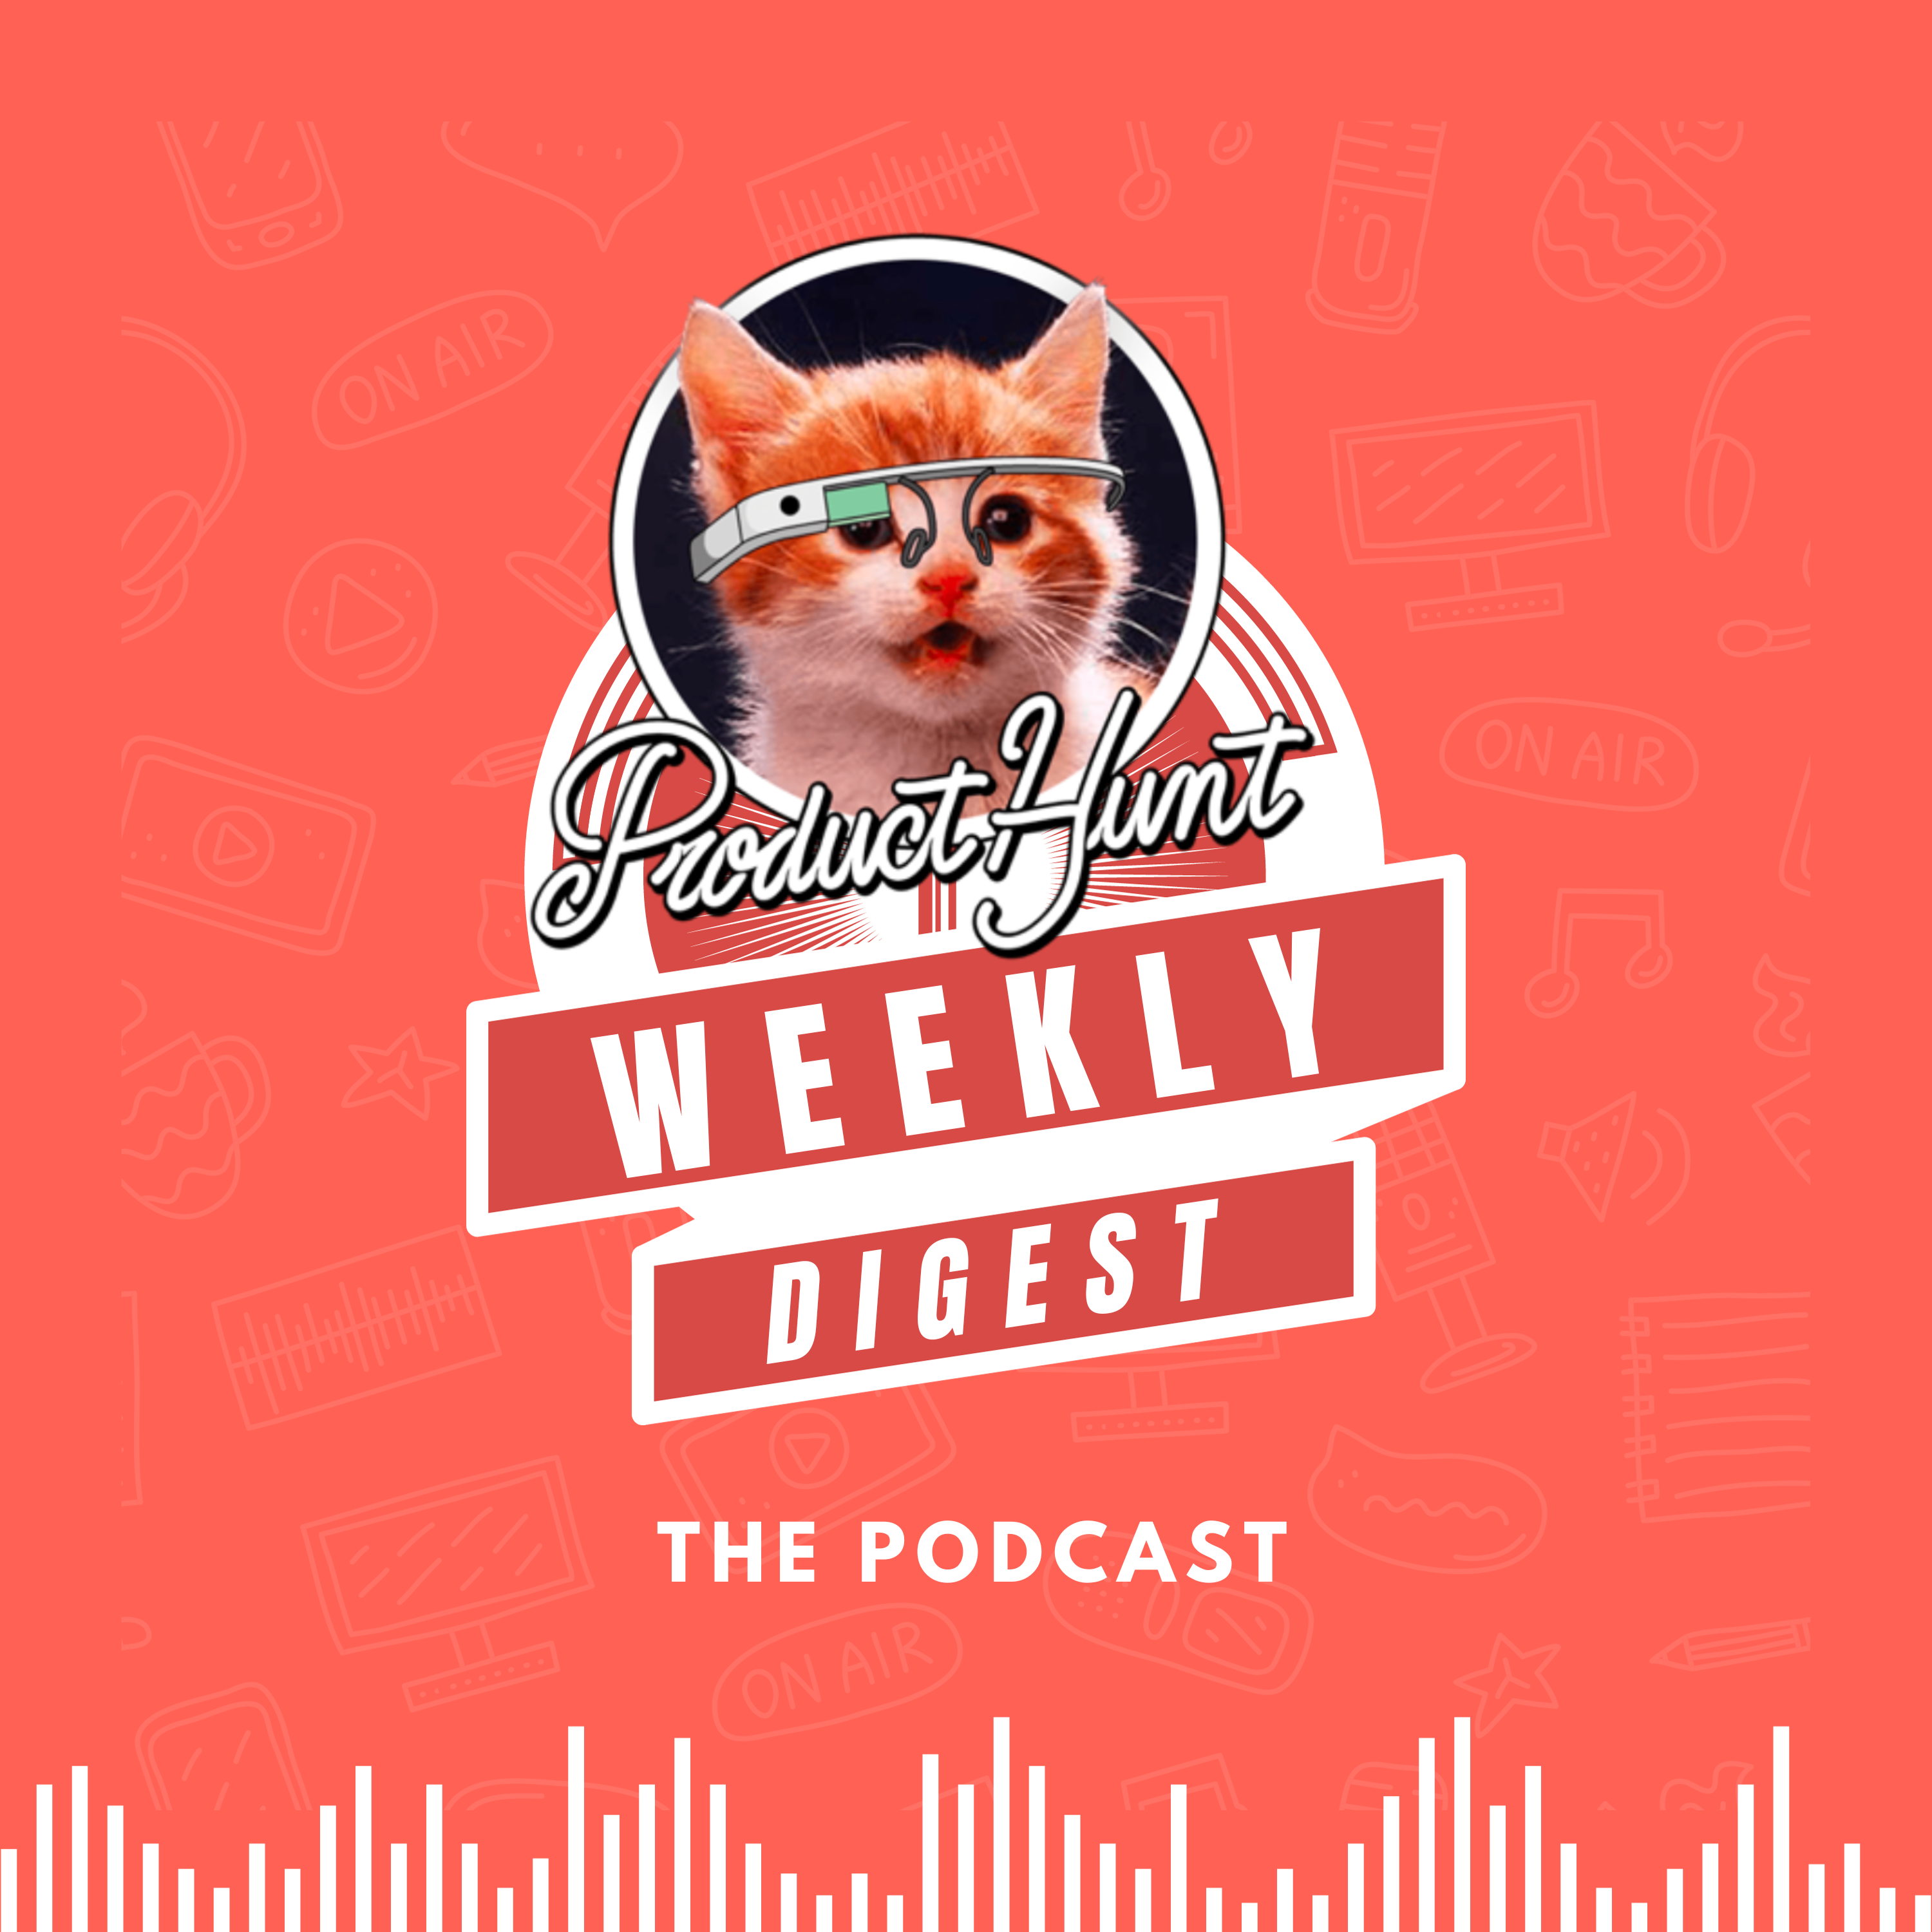 Product Hunt Weekly Digest Podcast logo